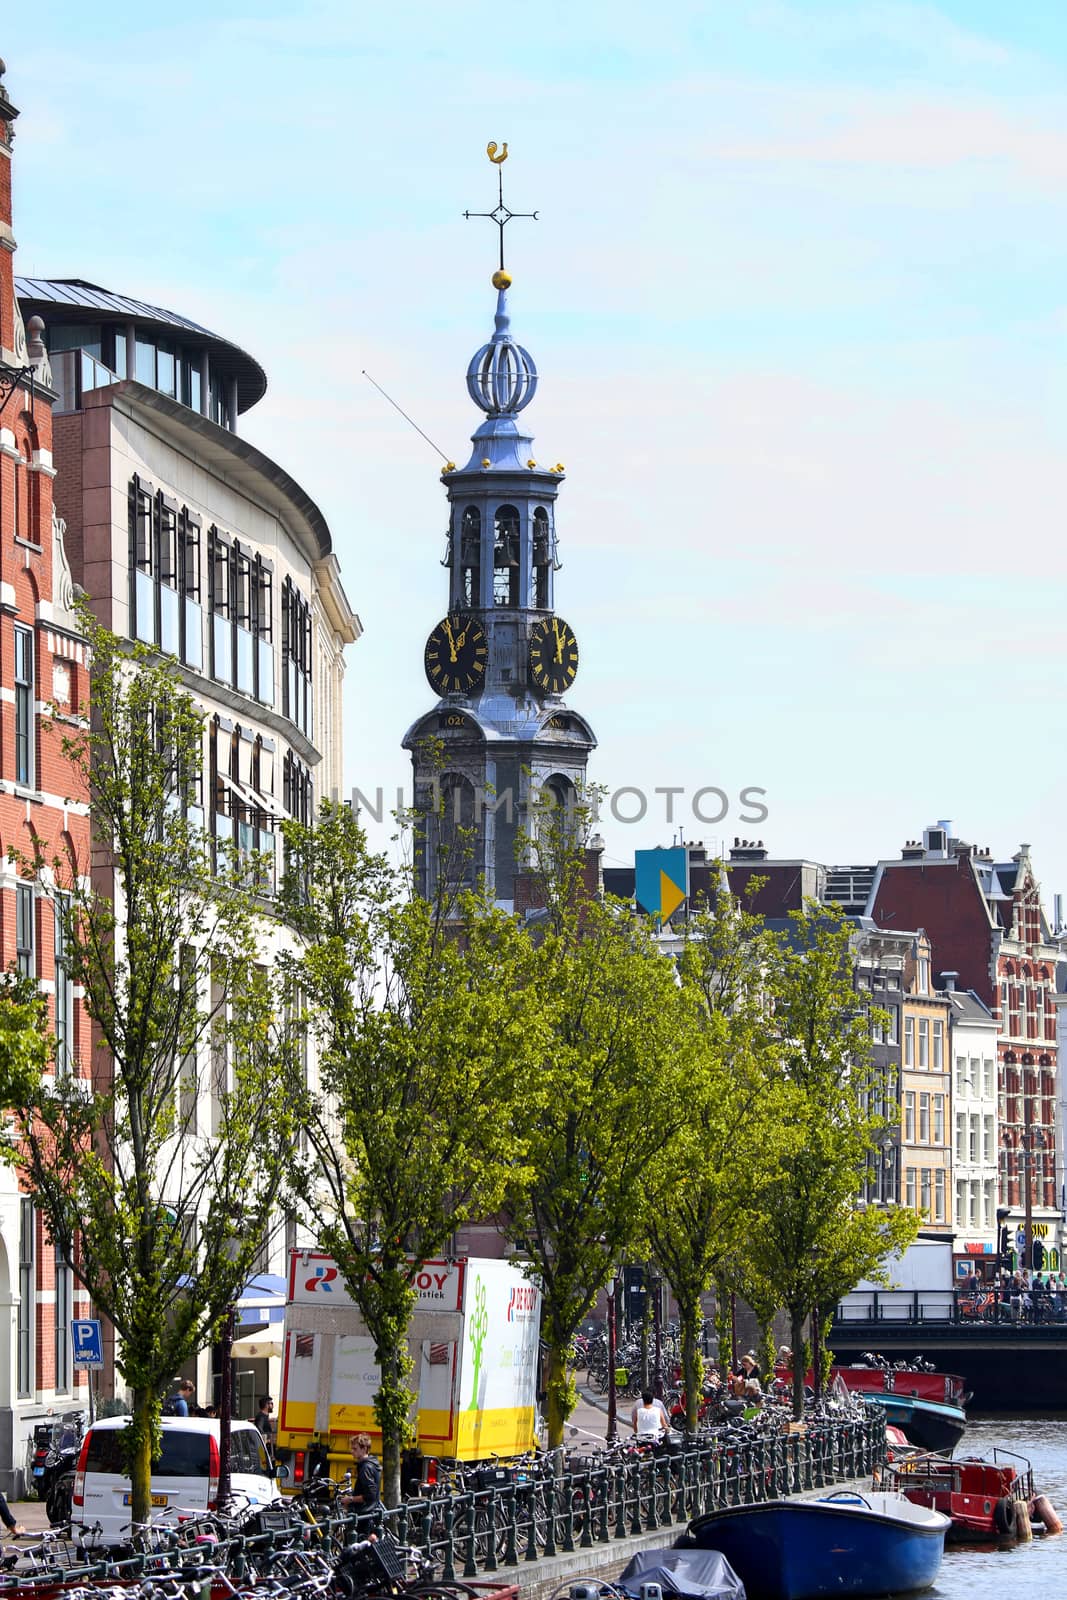 AMSTERDAM, THE NETHERLANDS - AUGUST 19, 2015: View on Bloemenmarkt and The Munttoren ("Coin Tower") from Koningsplein. People walk on the street Singel. Street life, Canal, bicycle and boat in Amsterdam. Amsterdam is capital of the Netherlands on August 19, 2015.